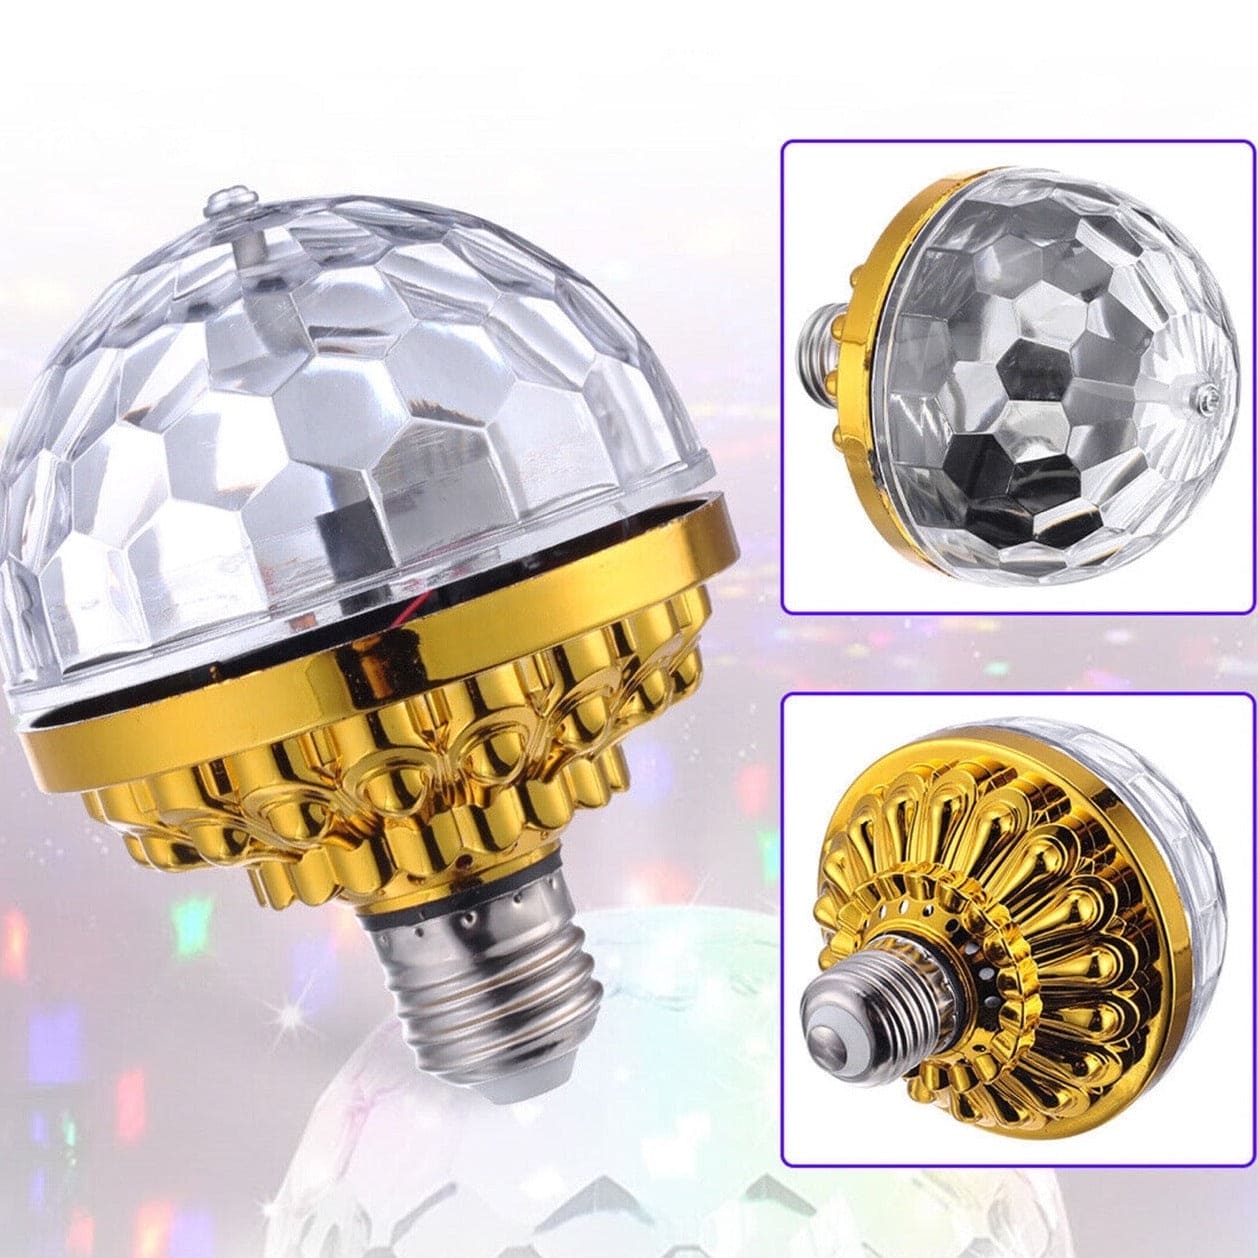 Colourful Magic Lamp, Magic Disco Ball Lamp With Holder, Colorful Rotating Magic Ball Light, Led Crystal Party Stage Light, Mini Rotatable Effect Bar DJ Light, Auto Rotating Lamp, Plug in Disco Ball Light Bulb for Home, Party Ambient Light With Holder